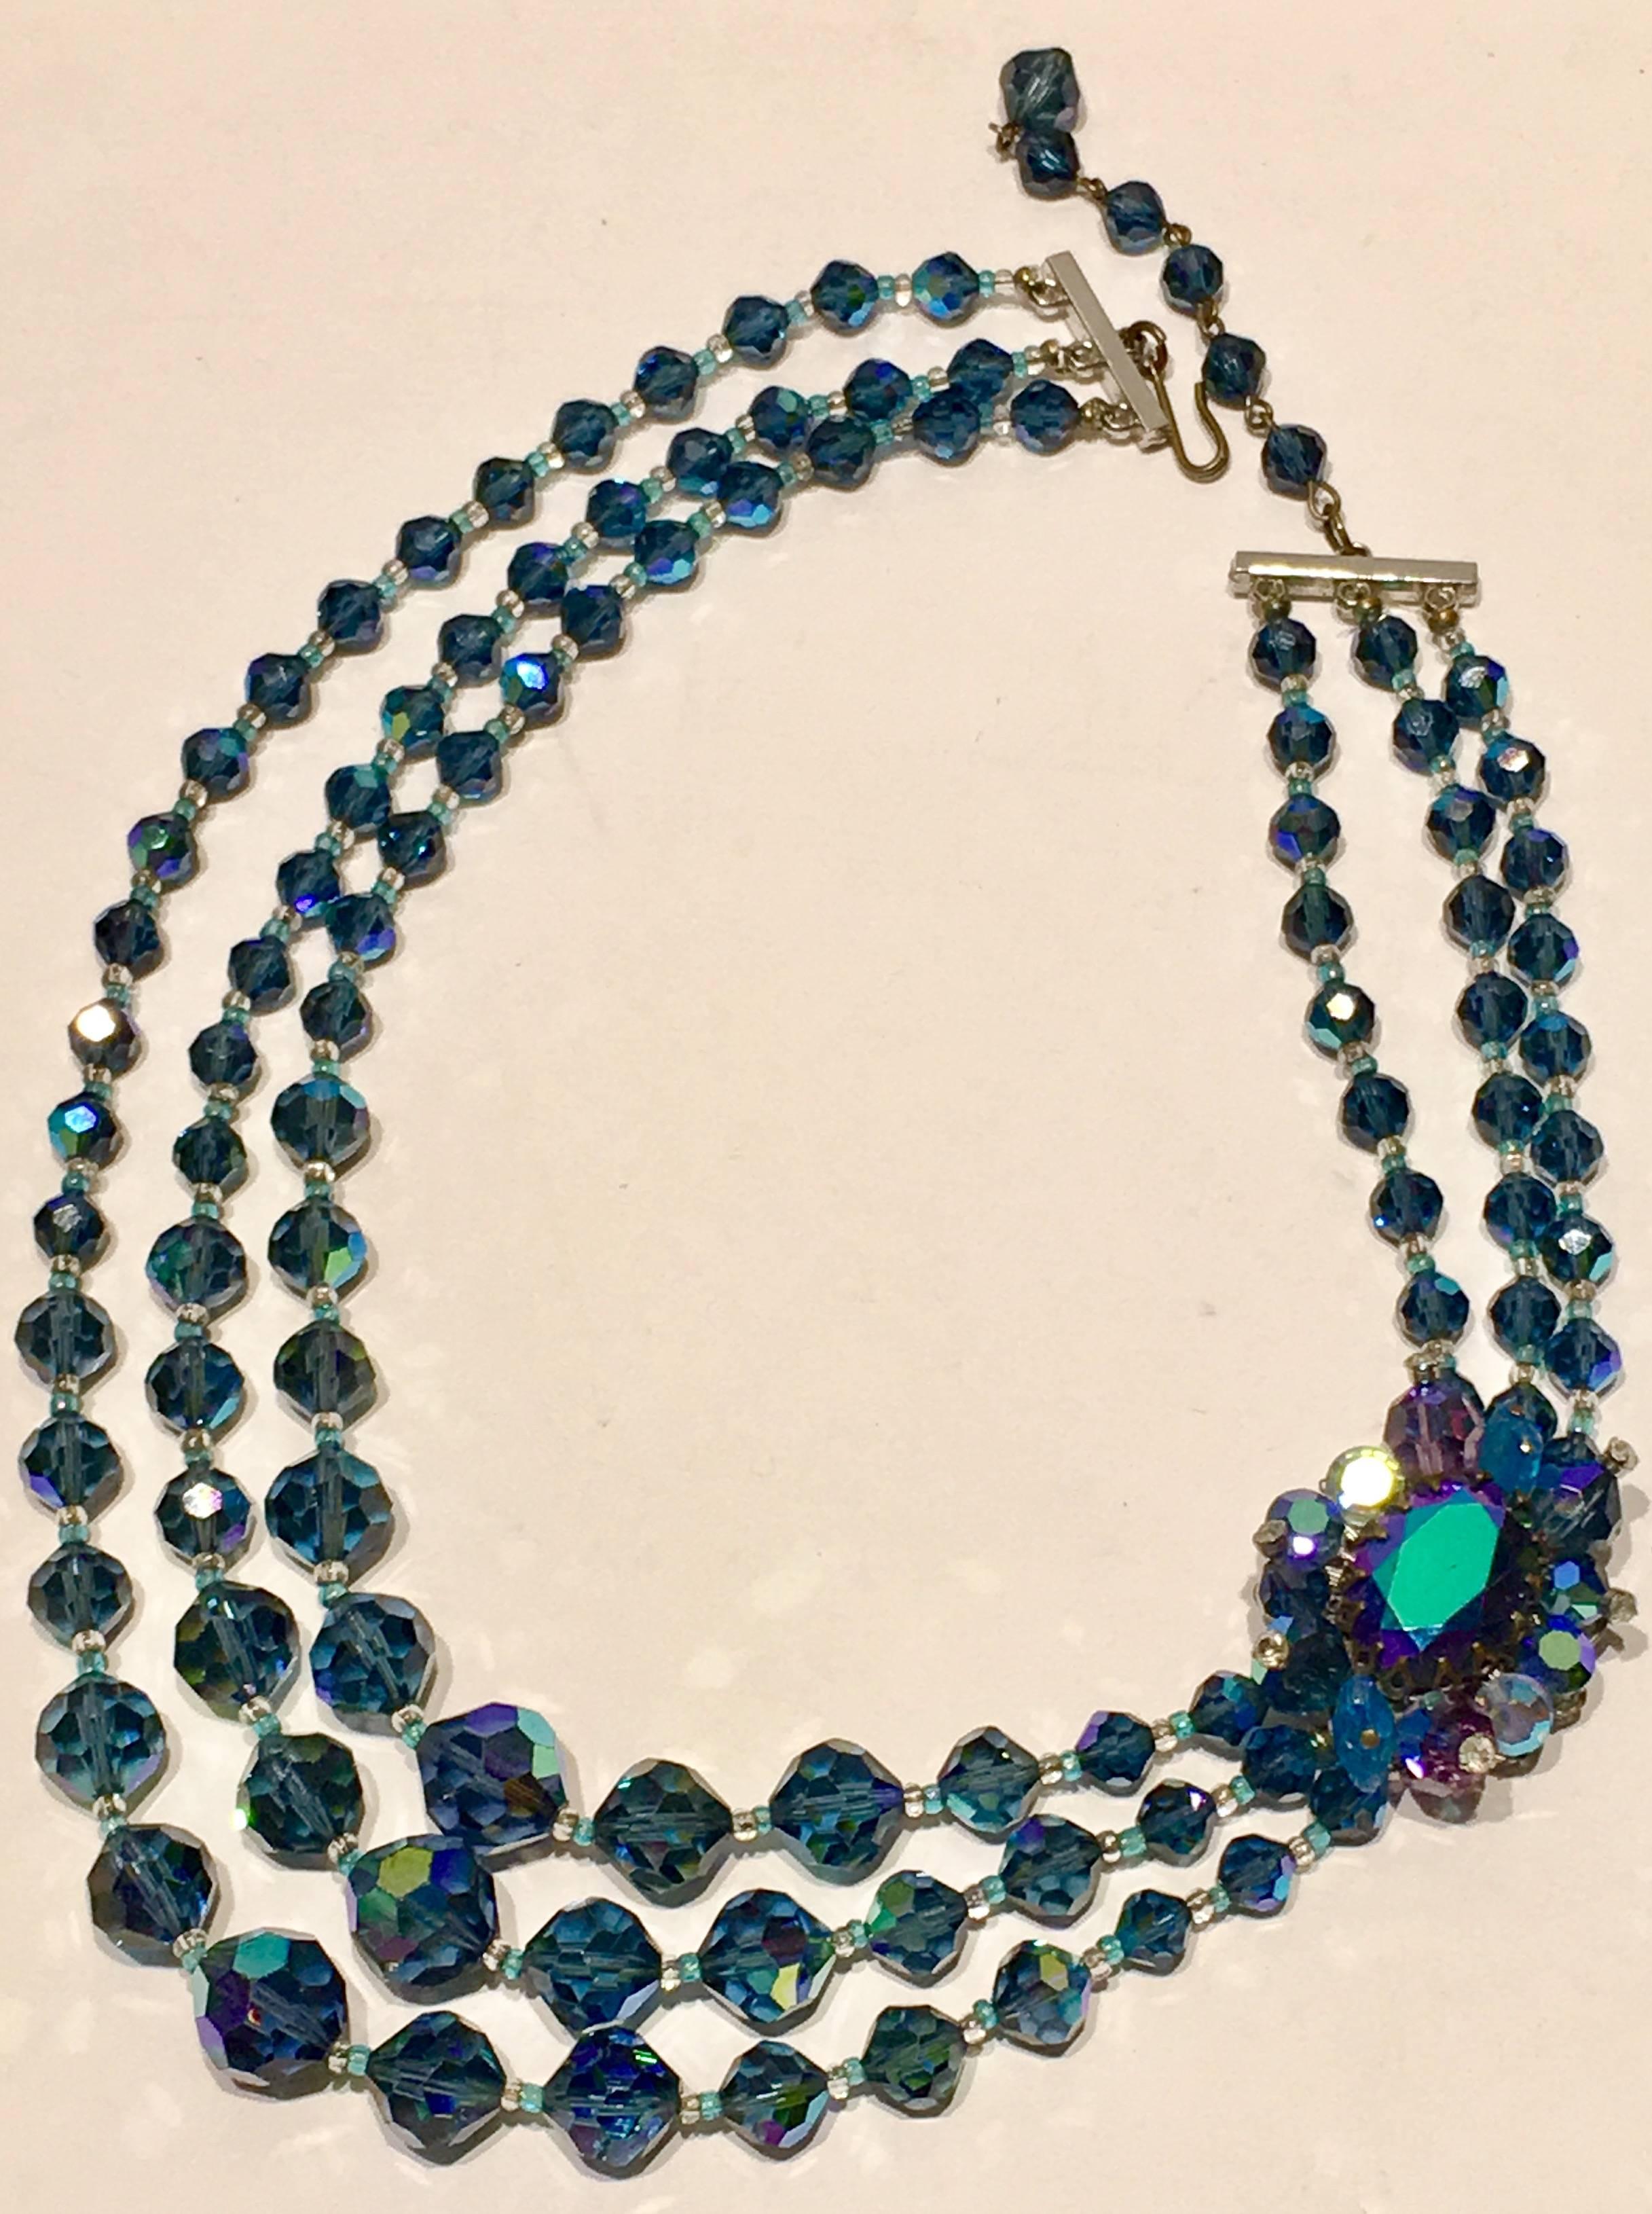 1950'S Peacock Blue Aurora Borealis Faceted Art Glass Bead Triple Strand Choker necklace. This sparking stunner features and off center cabochon cut large Aurora borealis glass center stone, prong set and backed in silver plated metal. The